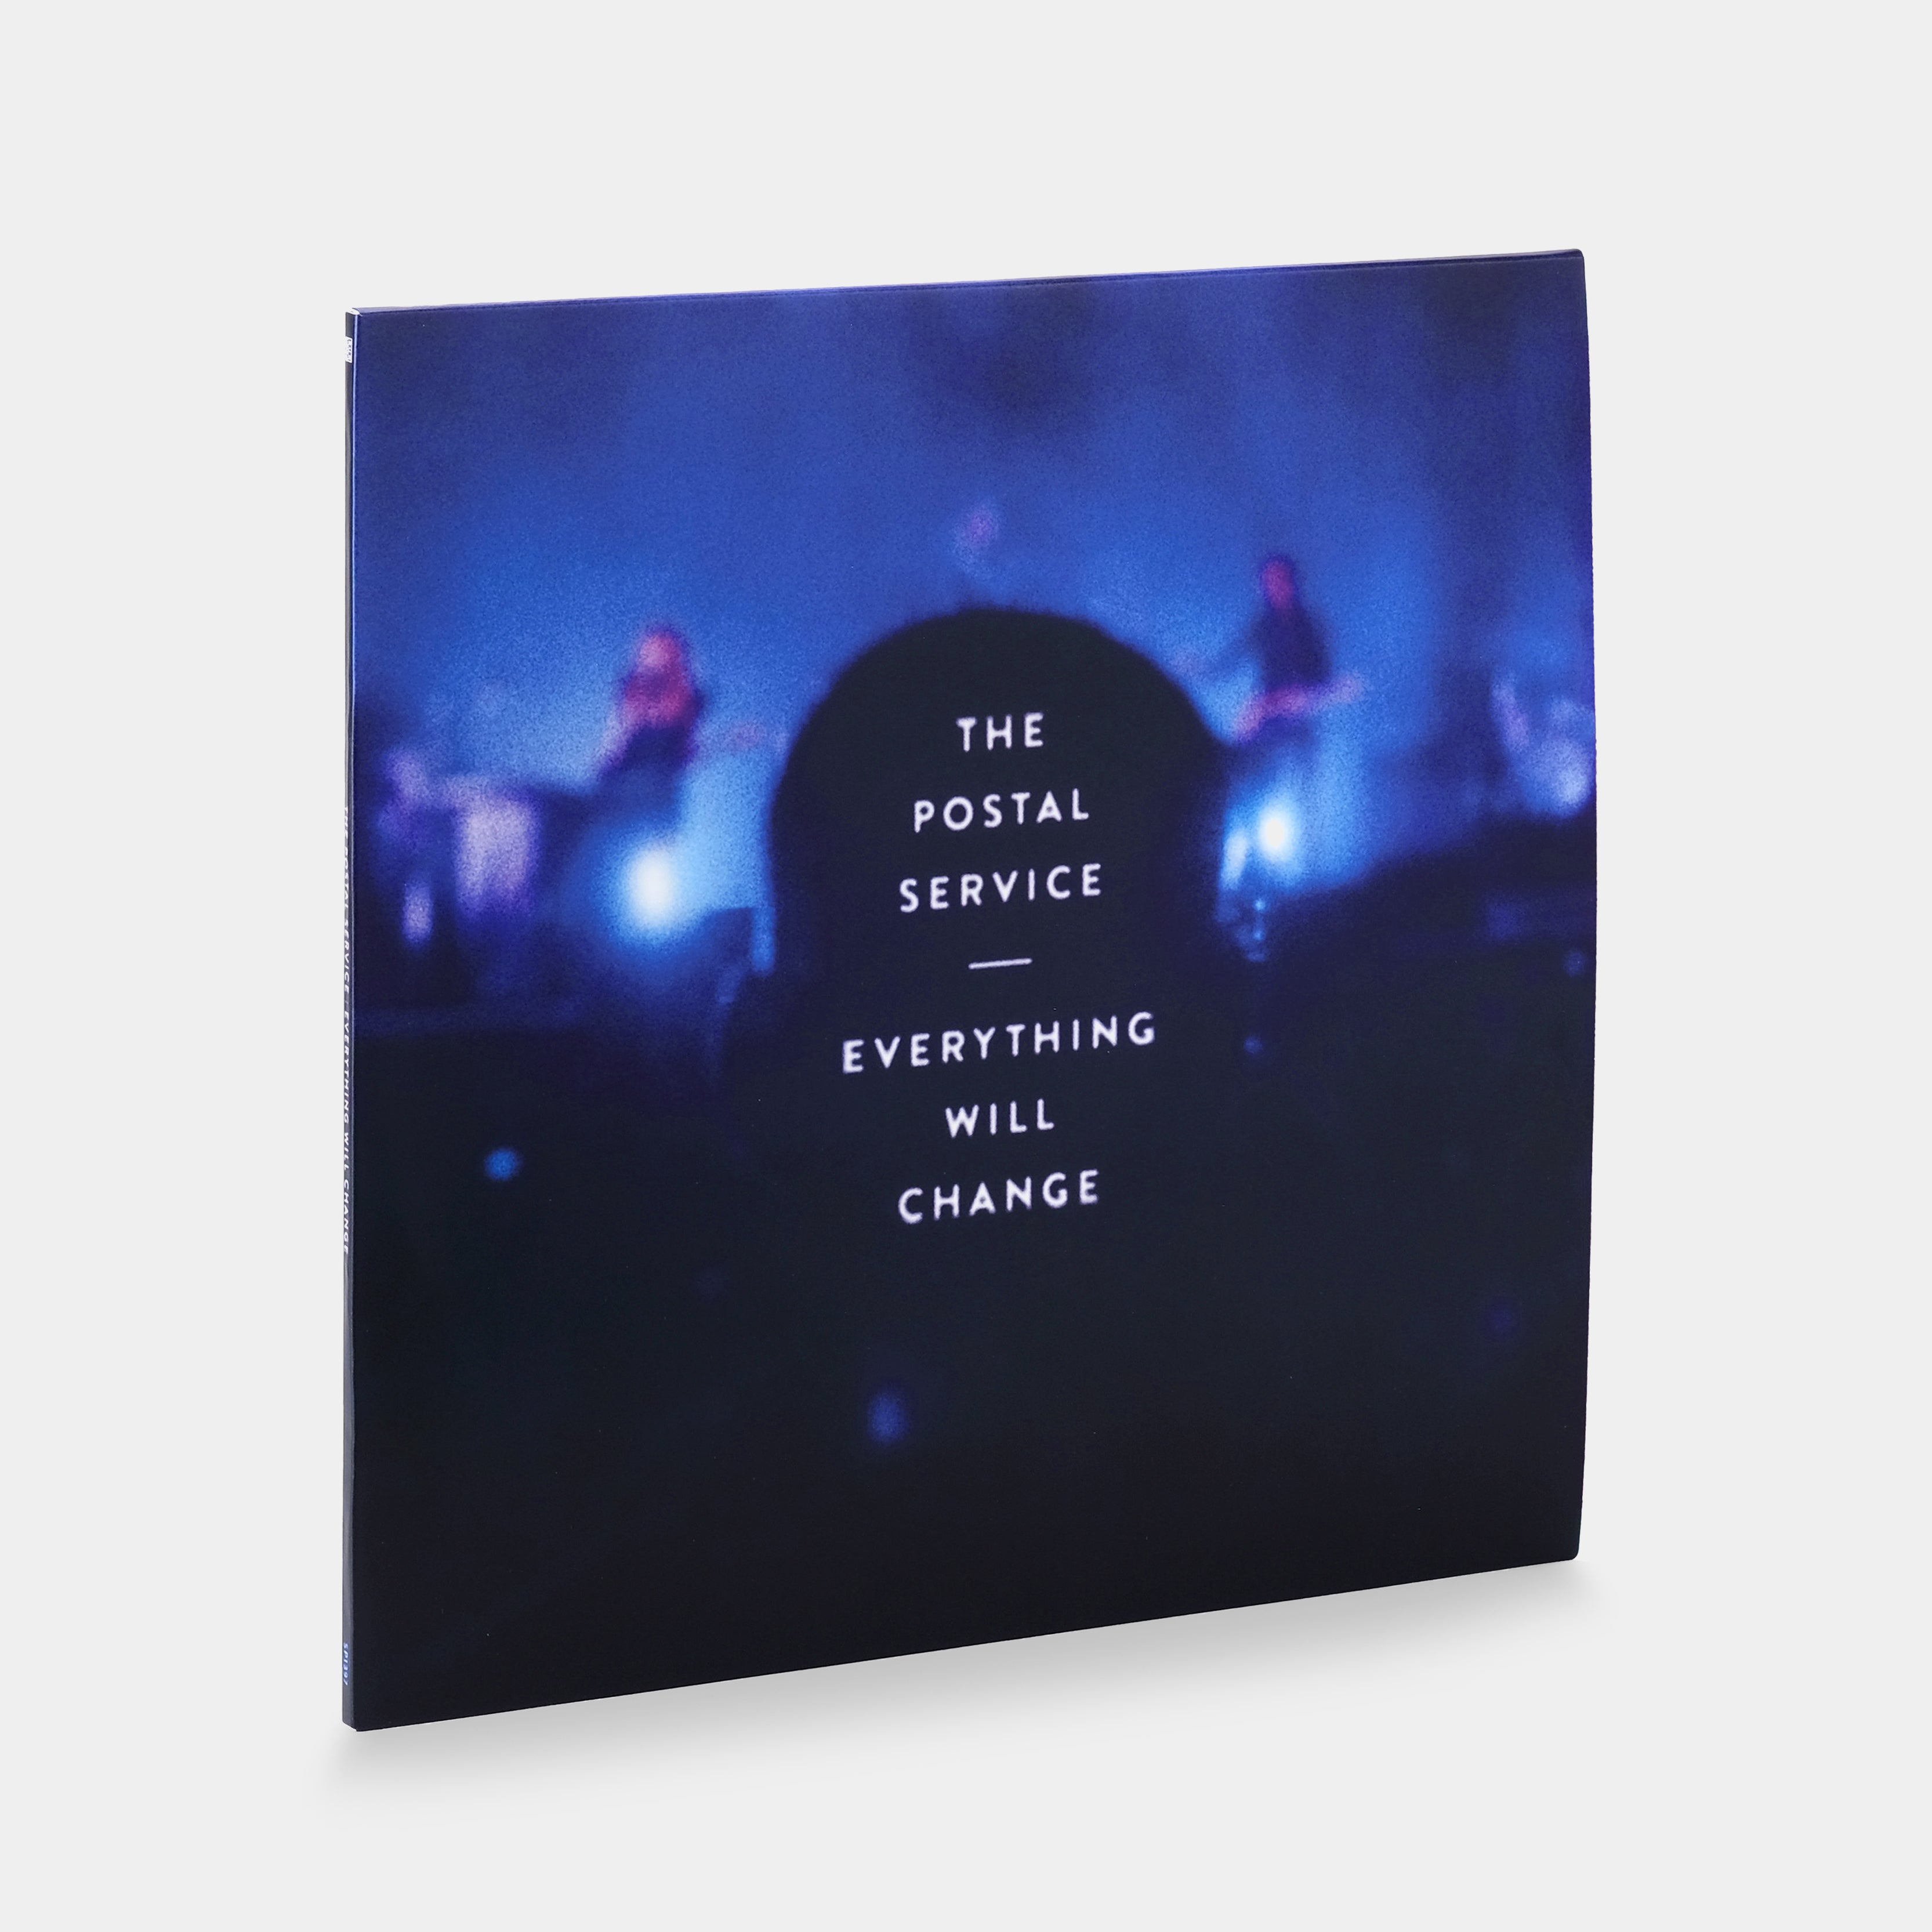 The Postal Service - Everything Will Change (Loser Edition) 2xLP Lavender and Blue Vinyl Record